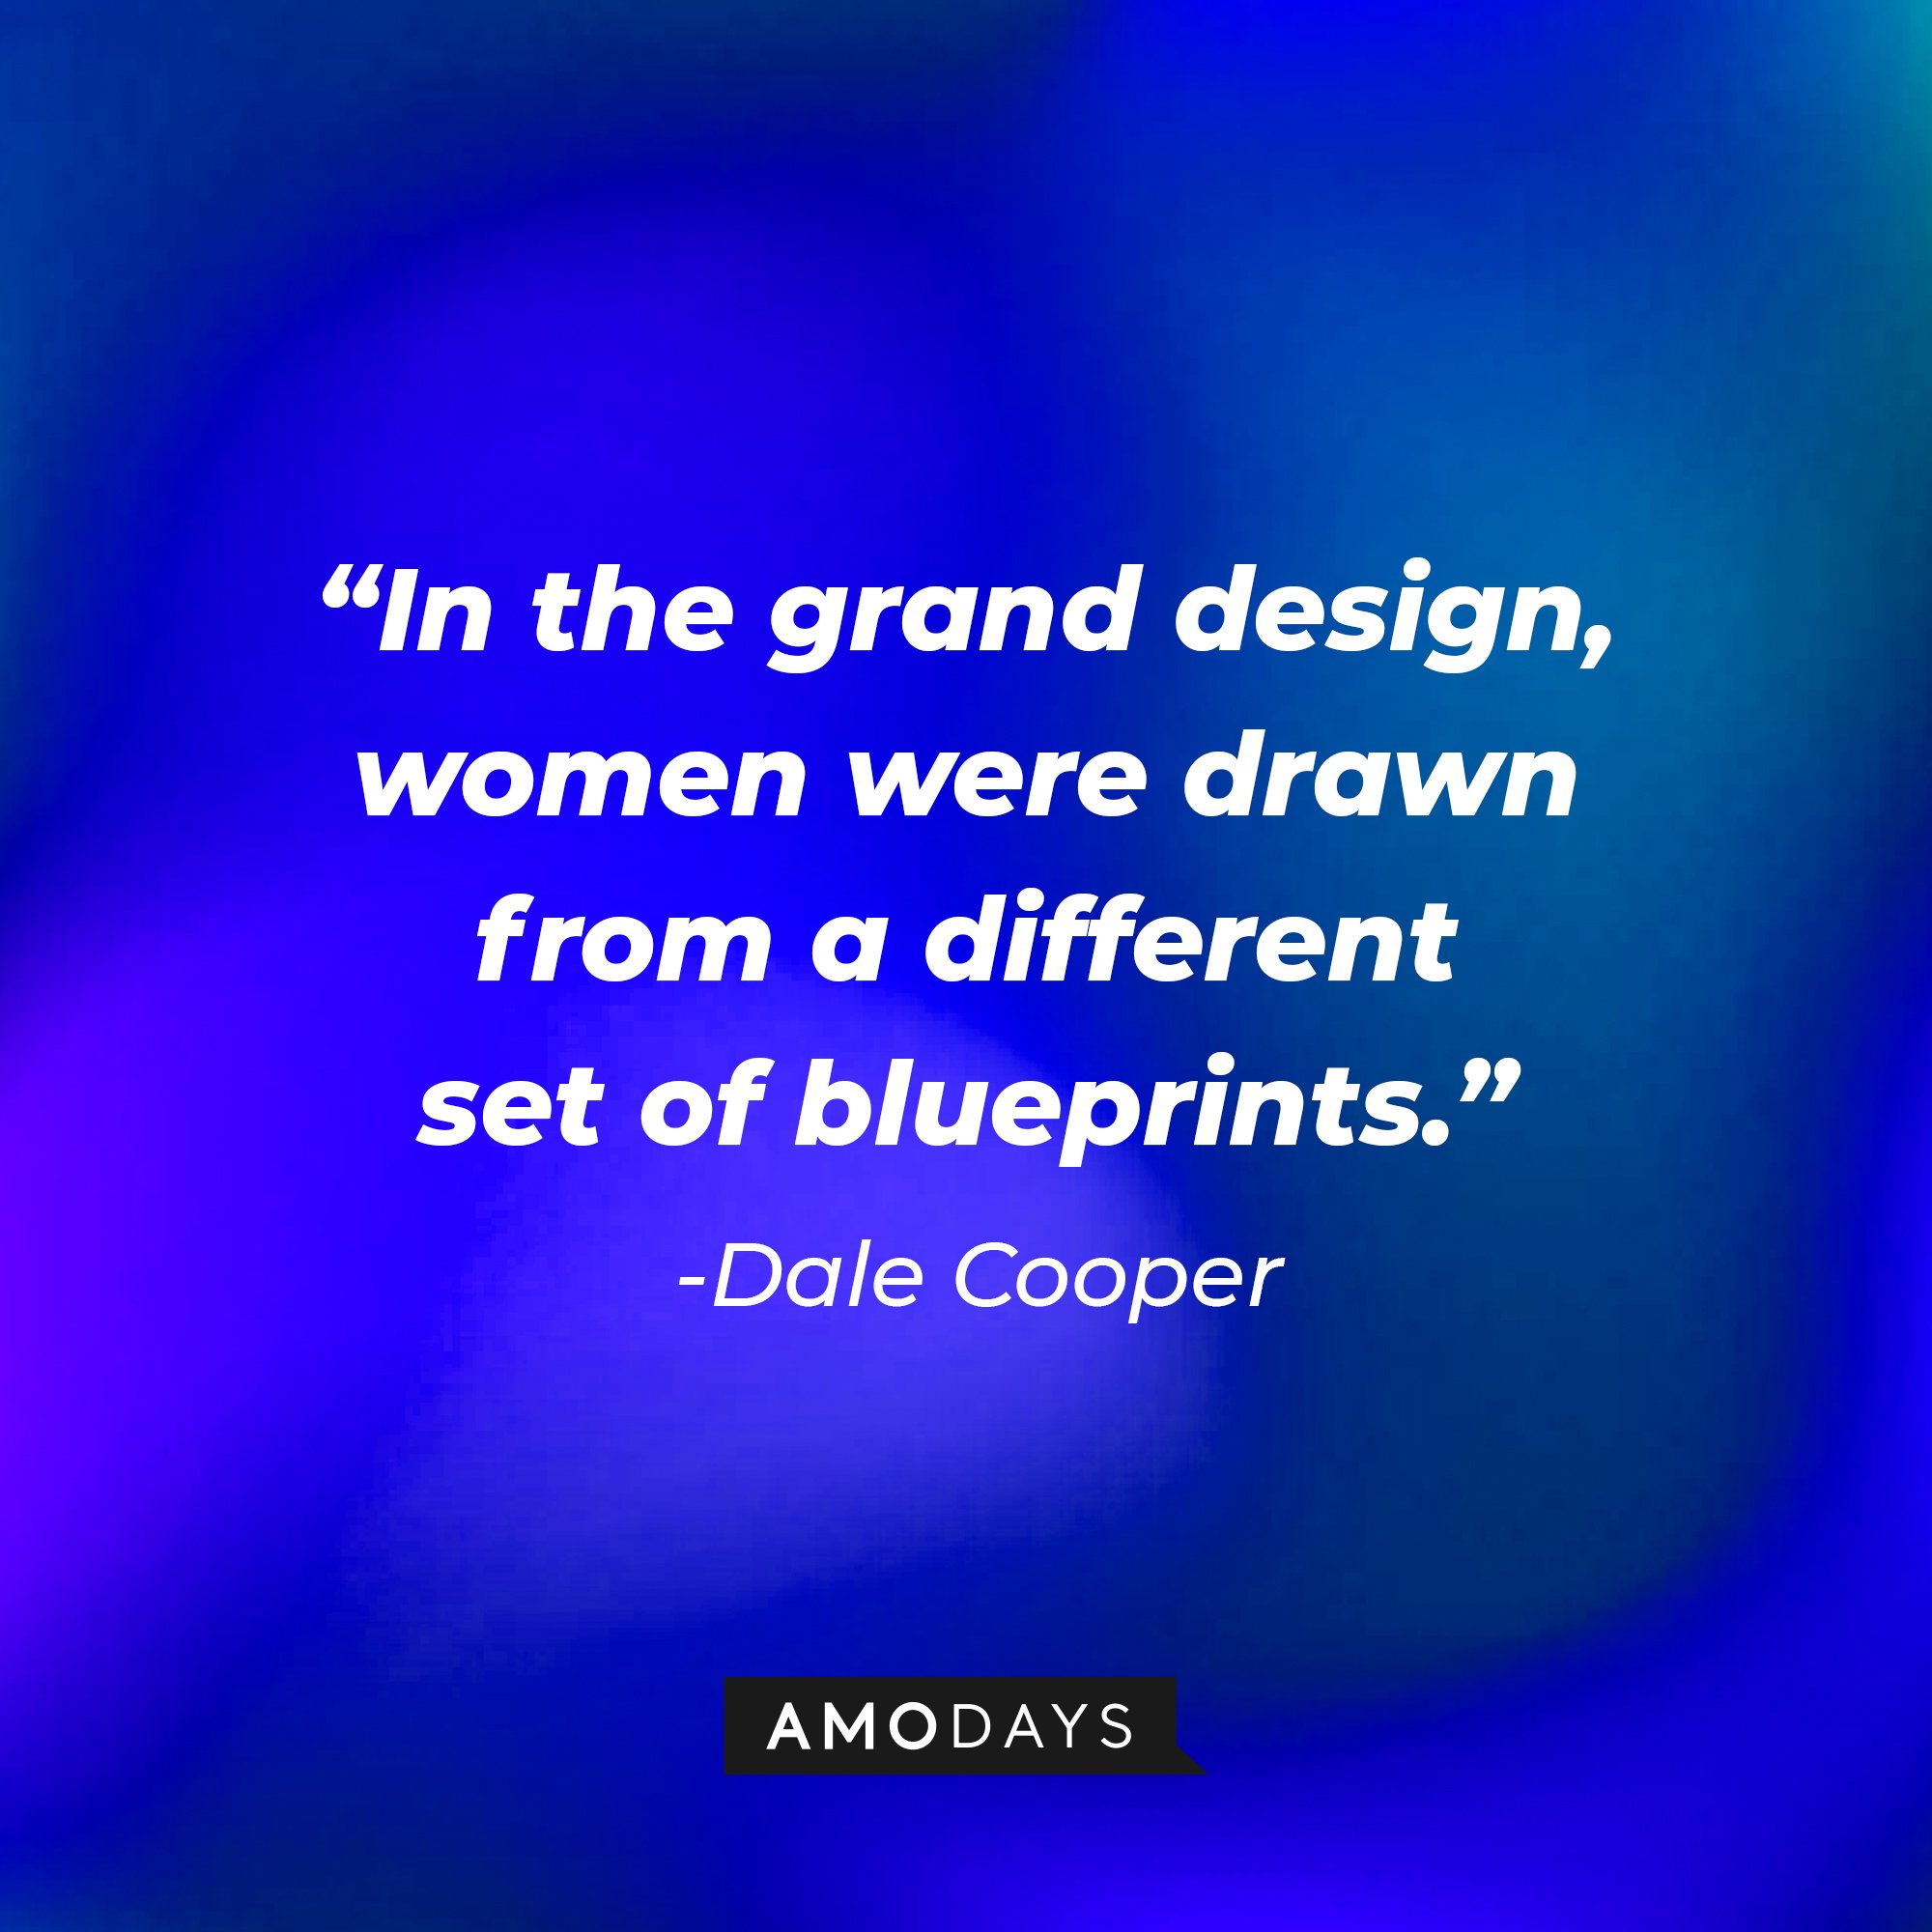 Dale Cooper's quote: "In the grand design, women were drawn from a different set of blueprints." | Image: AmoDays